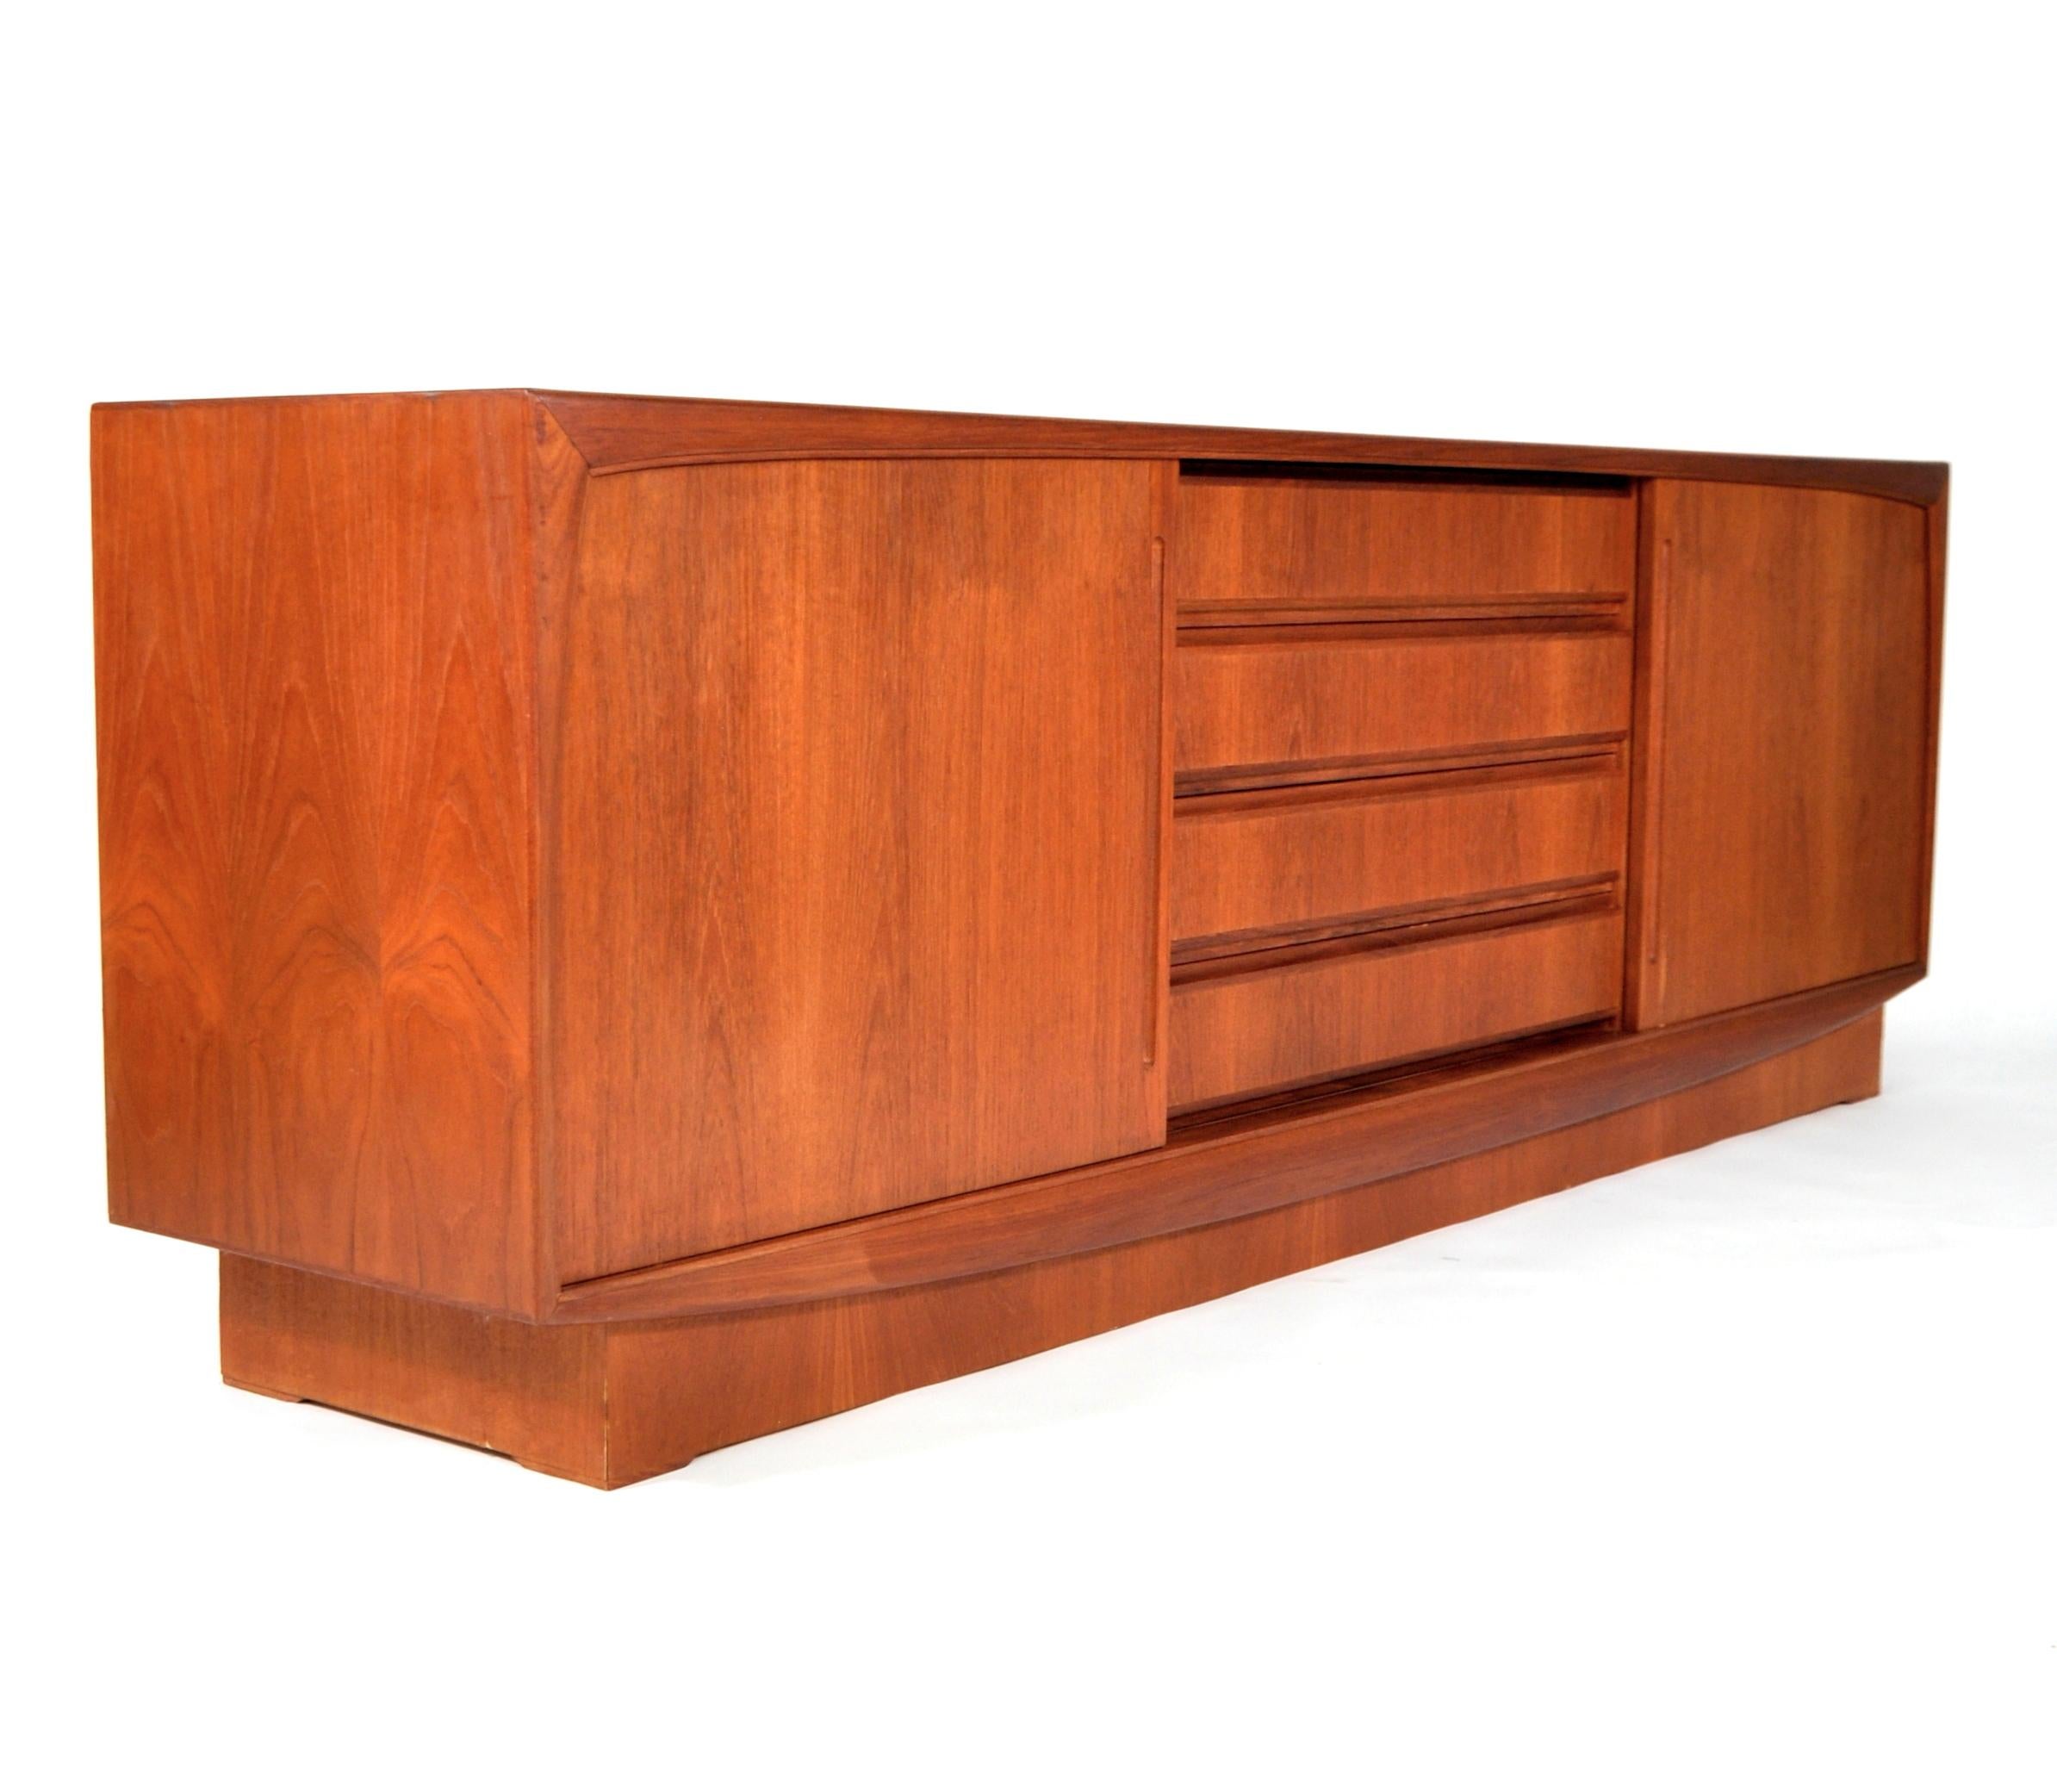 Beautiful vintage Scandinavian teak bar cabinet dating from the 1970s. The sideboard features two sliding doors opening to an interior fitted with a shelf, centering four drawers, on a plinth base. A versatile piece with simple and clean lines that